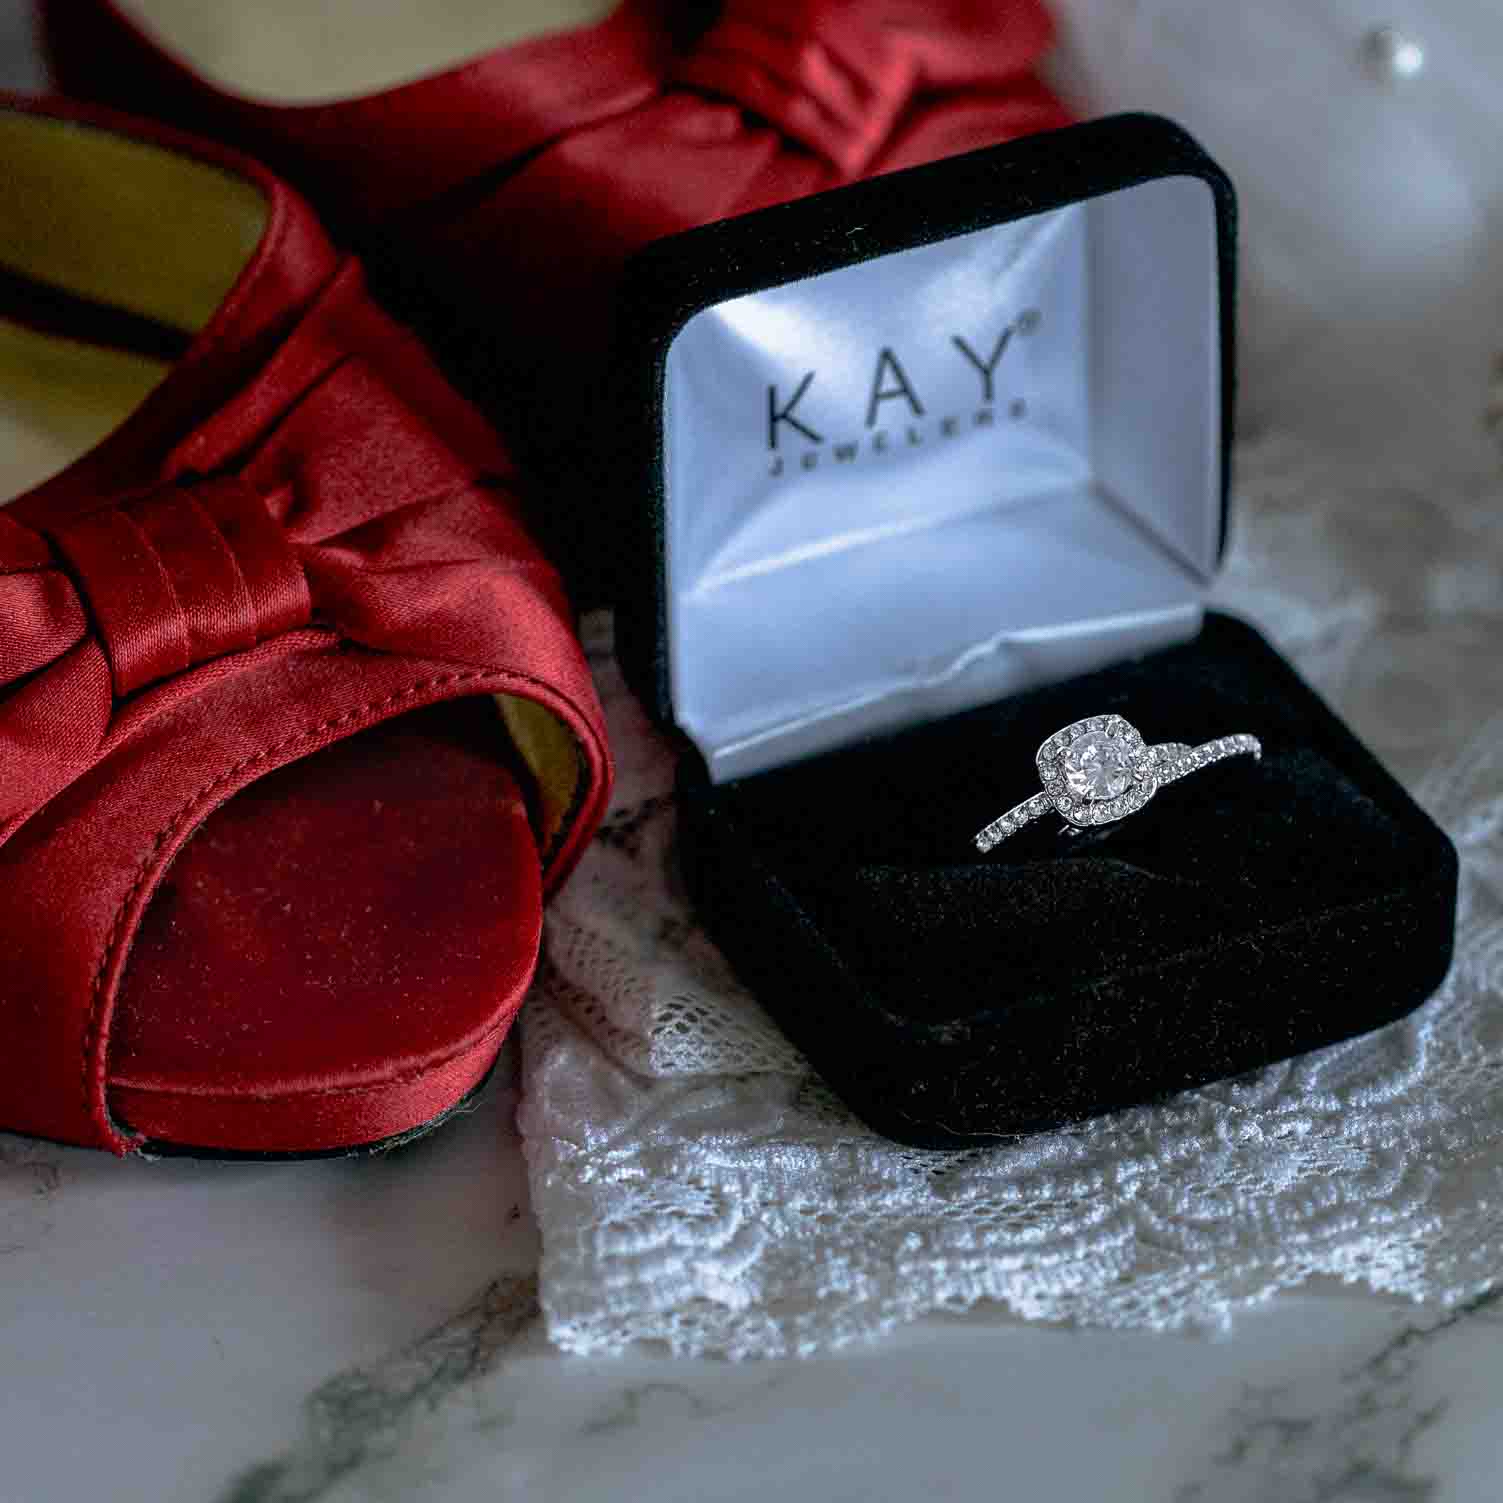 Wedding photography. Canon 100mm macro. Bridal detail image red peep-toe shoes. engagement ring and matching wedding band in Kay Jeweler ring box. Every Kiss Begins with kay
New England Wedding Photographer. Syracuse Wedding Photographer.